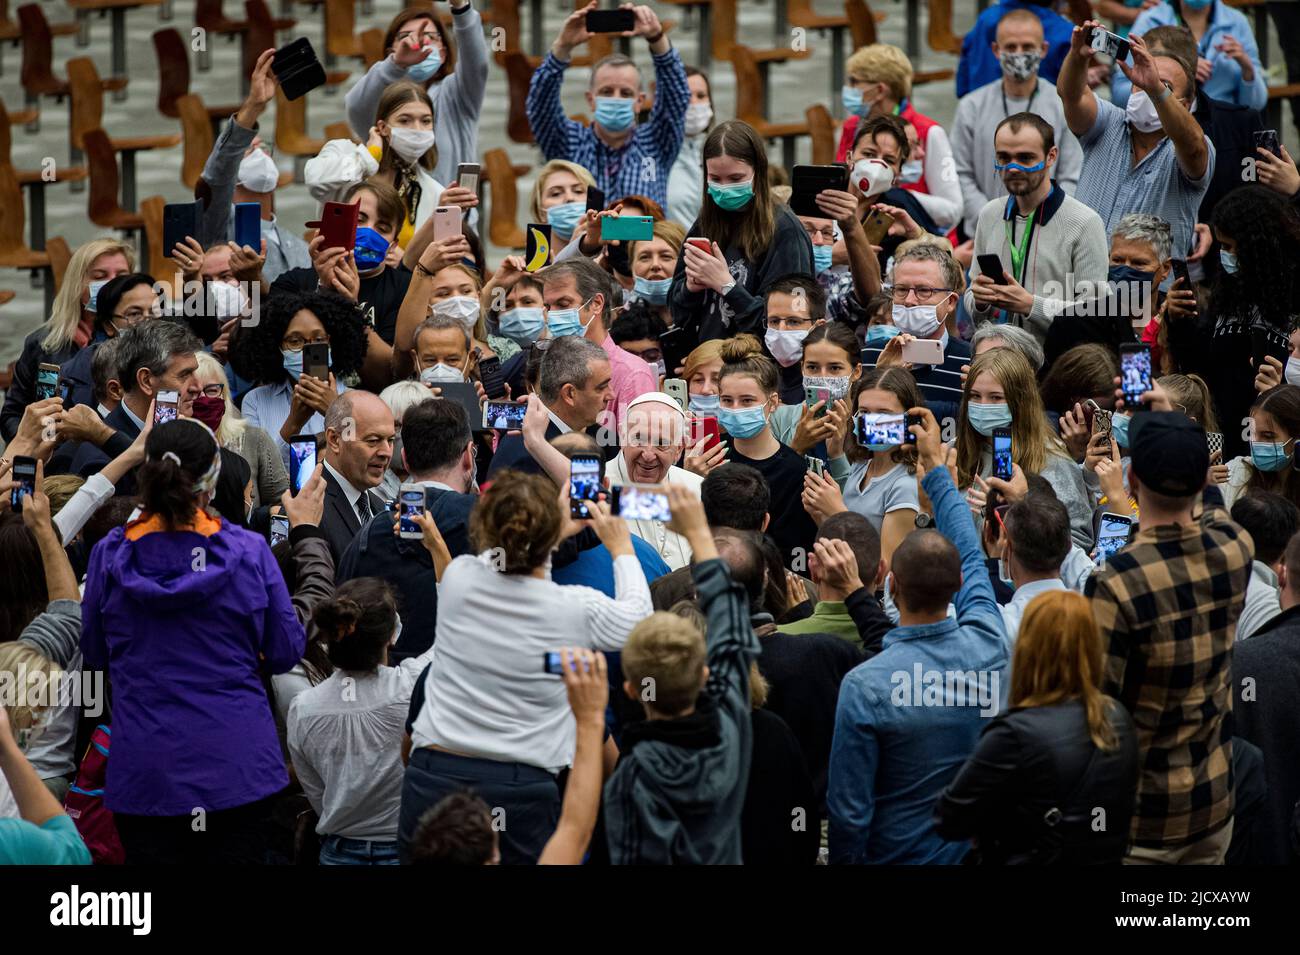 Pope Francis meets with worshippers upon arrival for a limited public audience during the COVID-19 pandemic, Vatican, Rome, Lazio, Italy, Europe Stock Photo